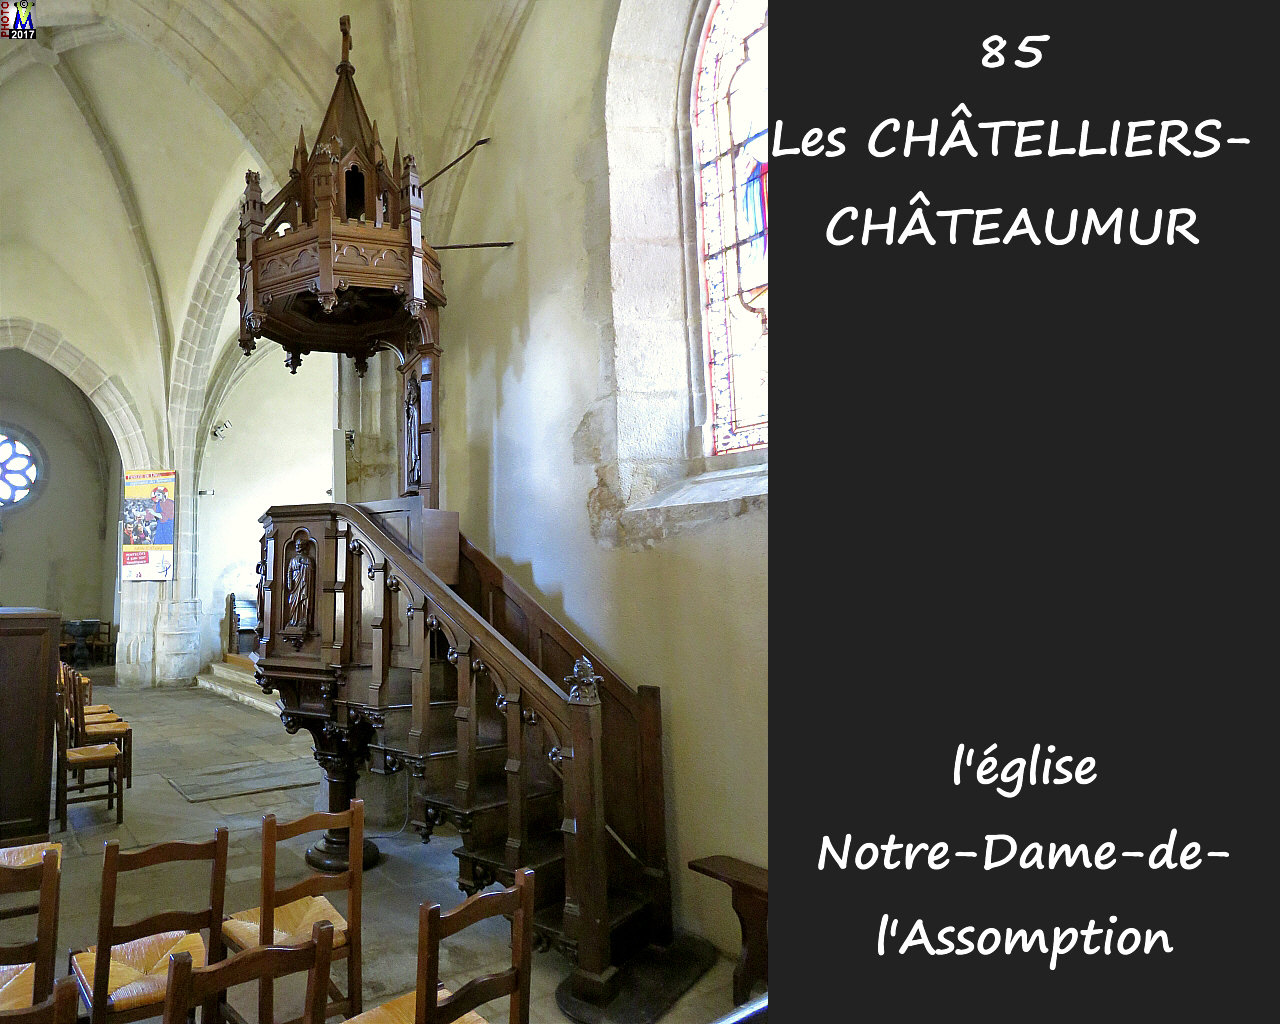 85CHATELLIERS-CHATEAUMUR_eglise_1142.jpg